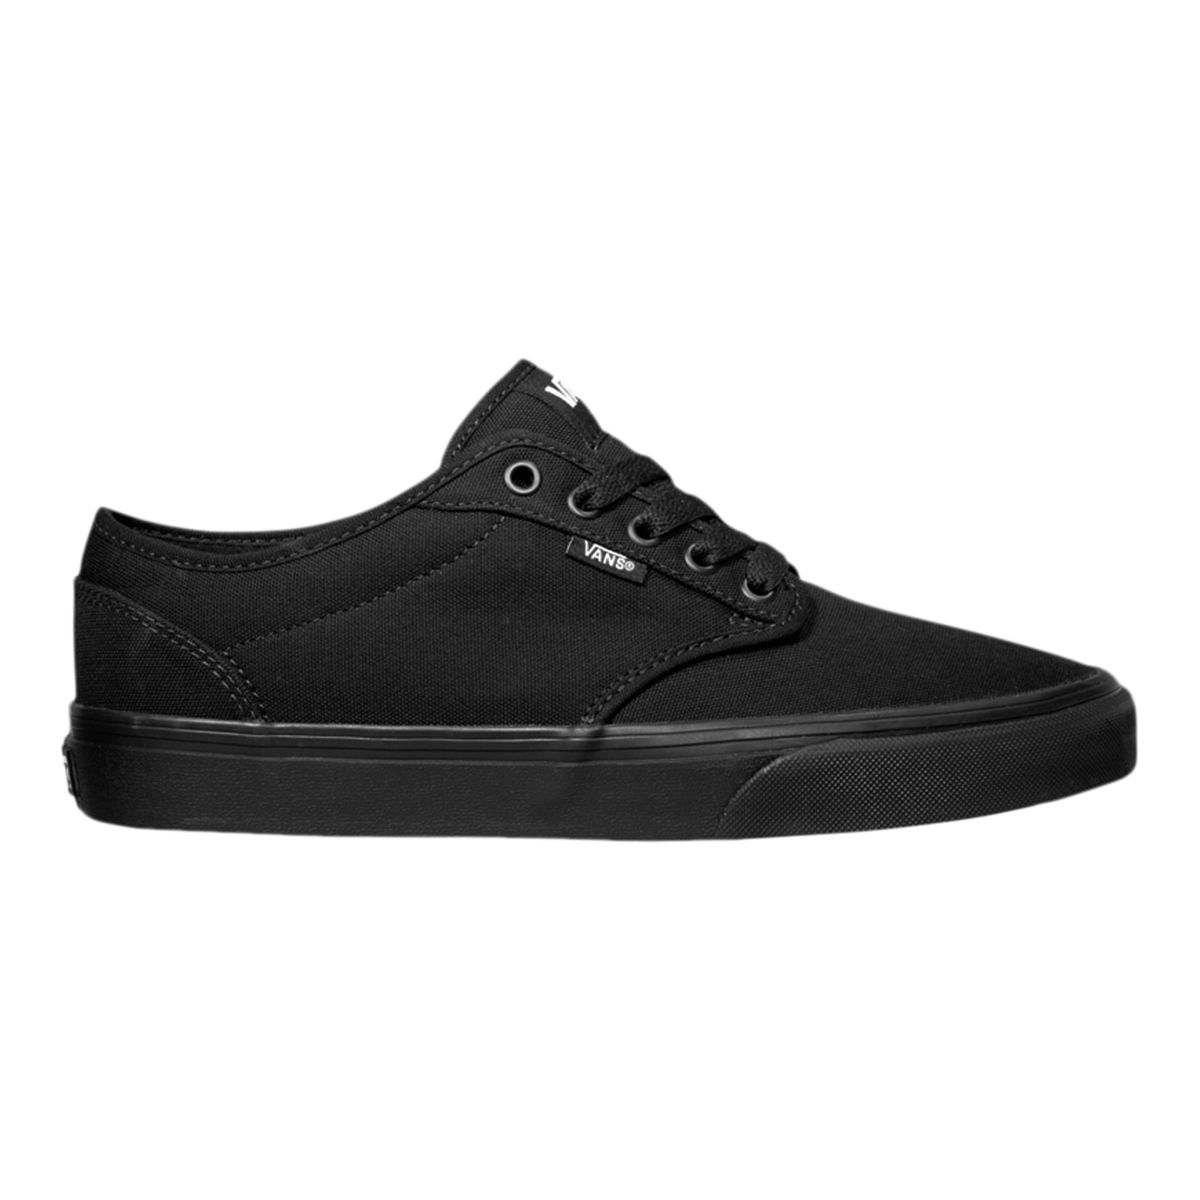 Image of Vans Men's Atwood Skate Shoes Sneakers Casual Canvas Lightweight